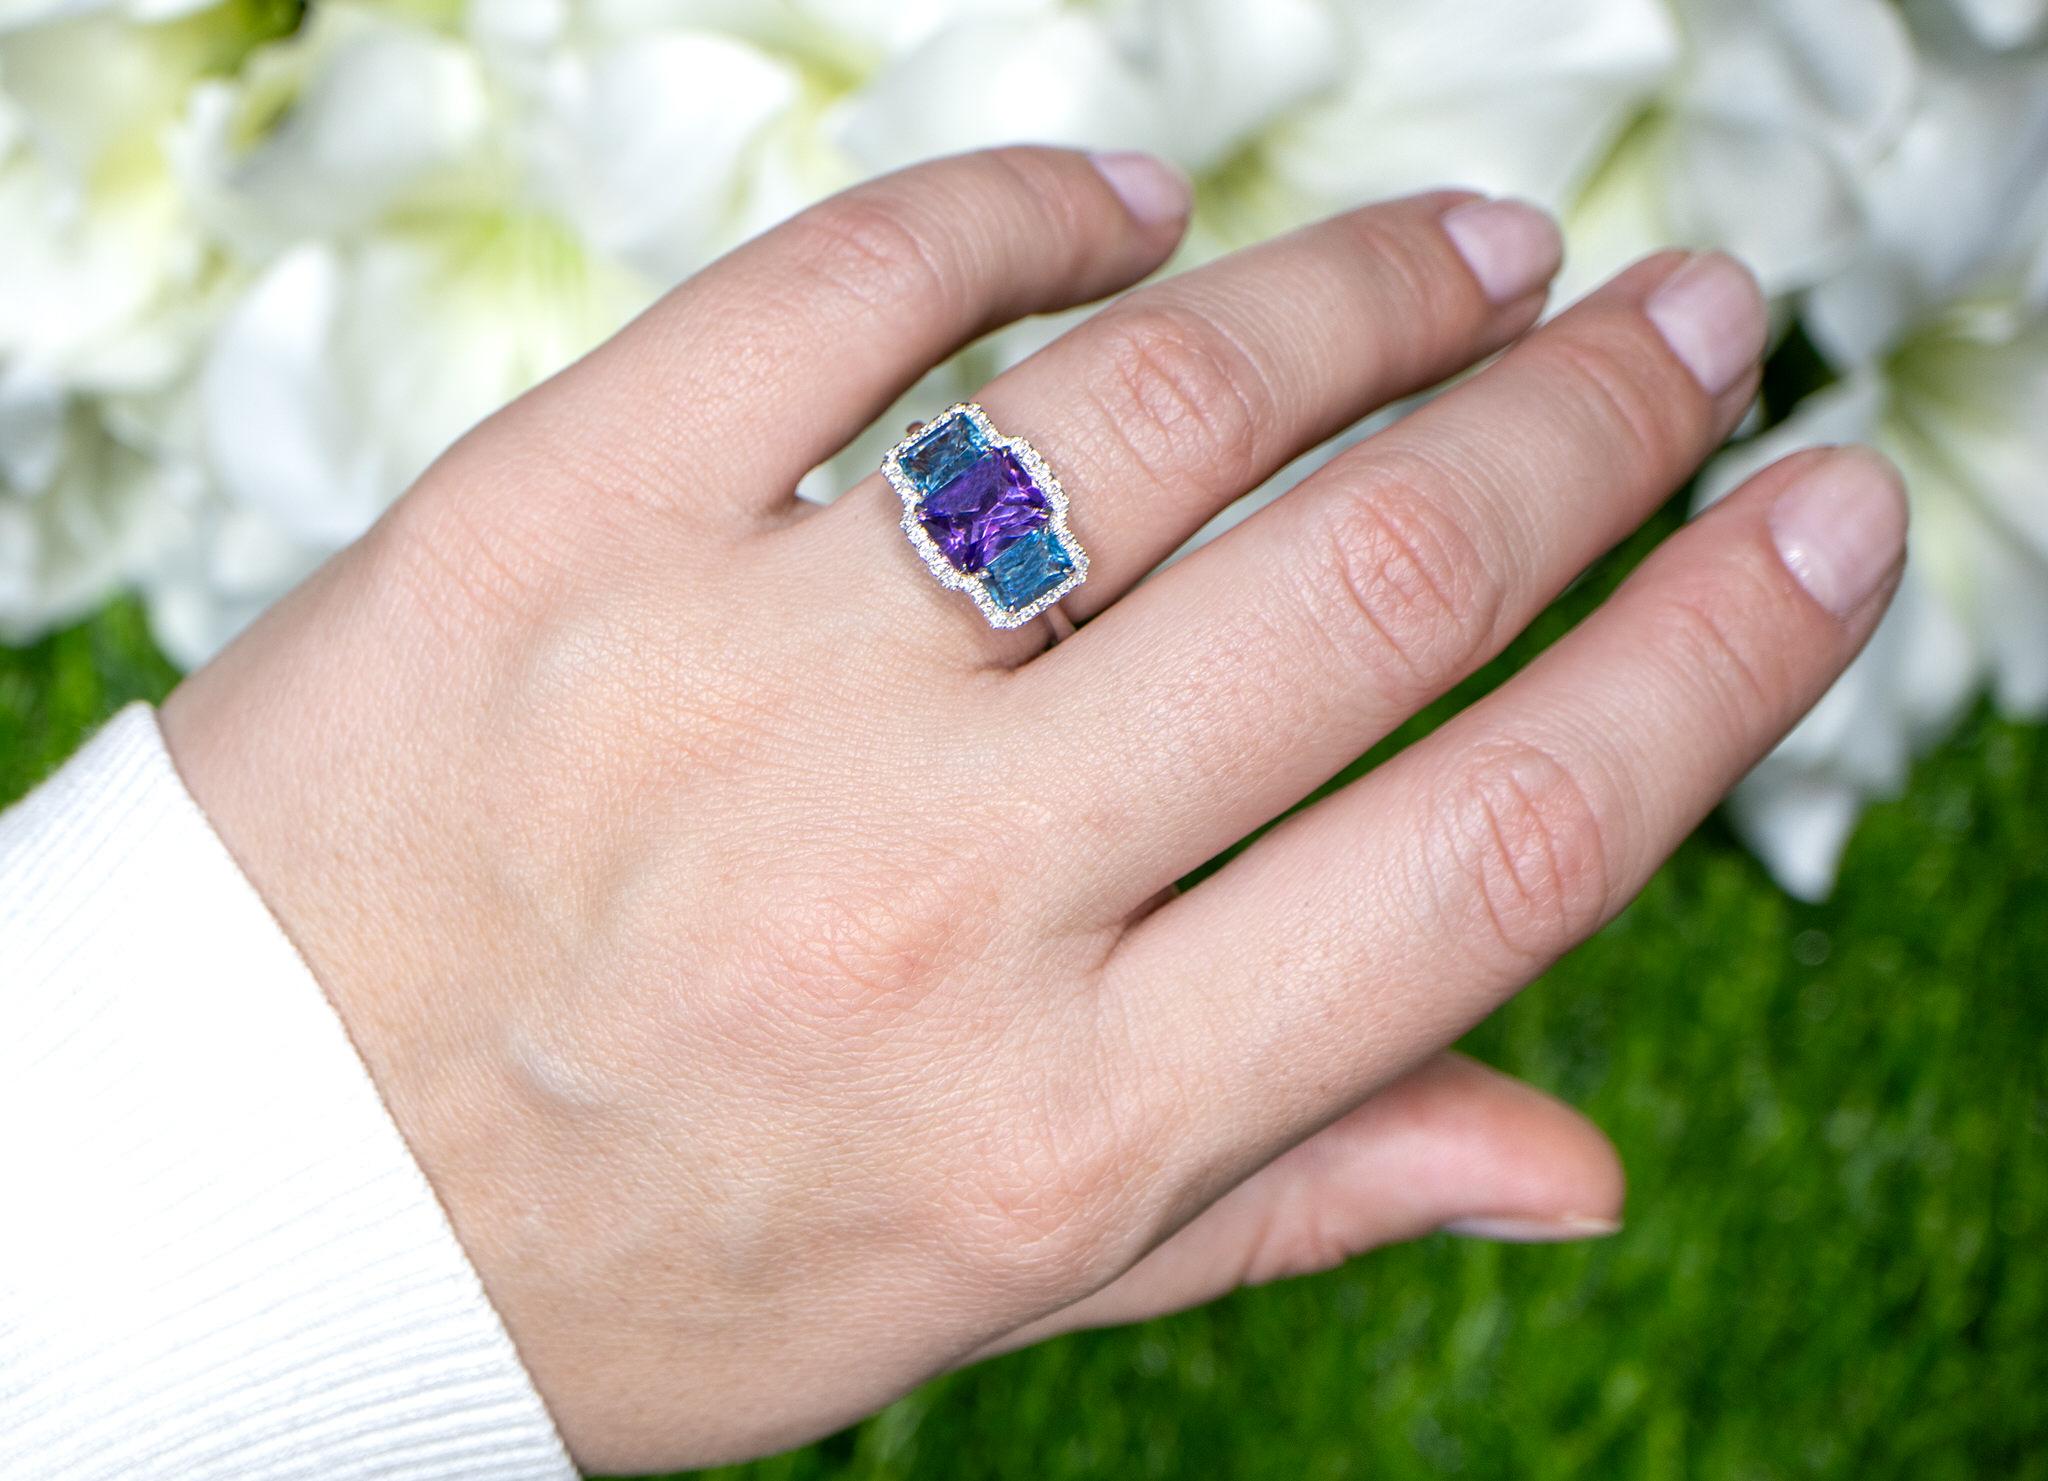 It comes with the Gemological Appraisal by GIA GG/AJP
All Gemstones are Natural
Amethyst = 1.60 Carat
London Blue Topazes = 1.28 Carats
Diamonds = 0.18 Carats
Metal: 18K White Gold
Ring Size: 6.5* US
*It can be resized complimentary